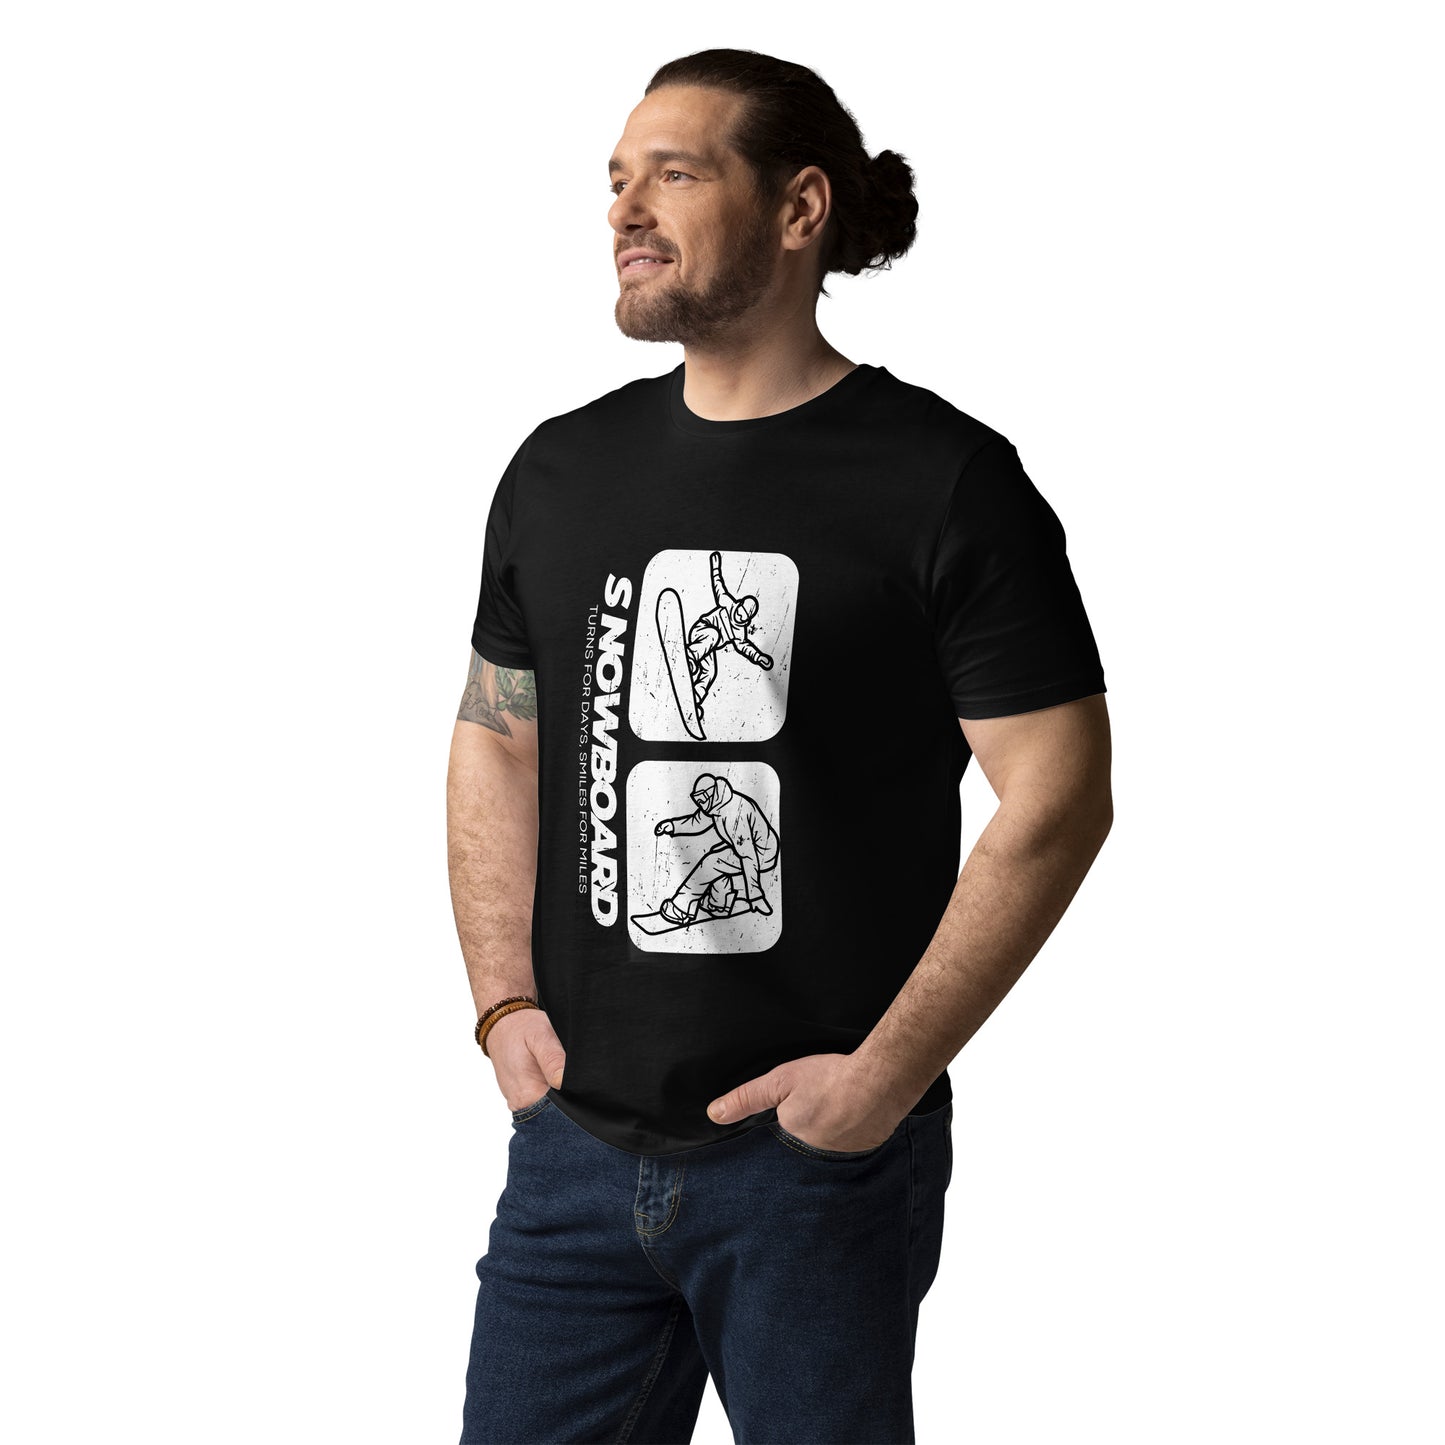 organic "Turns for days, smiles for miles" cotton t-shirt